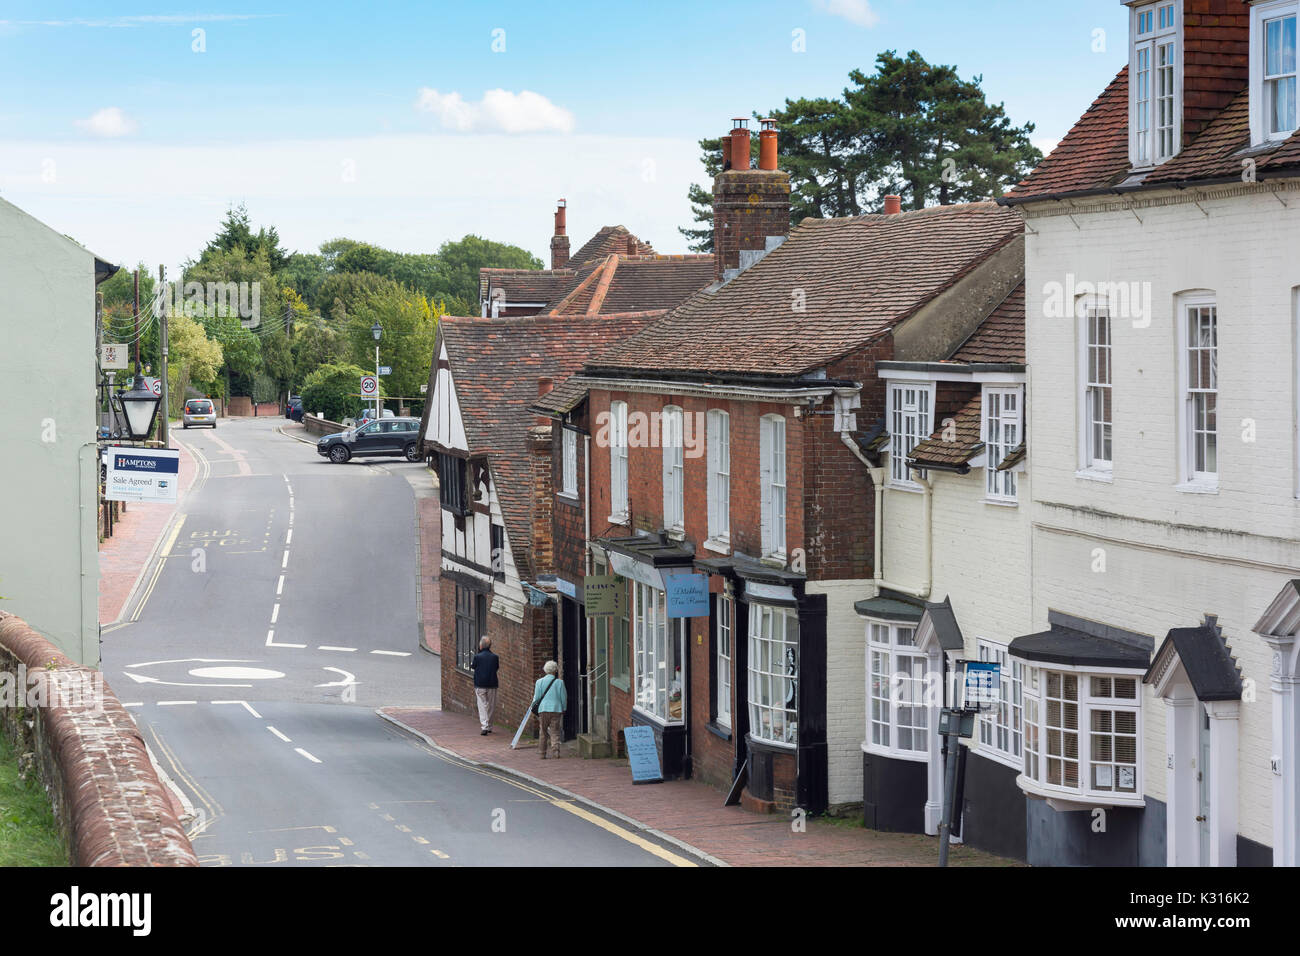 Village High Street from Keymer Road, Ditchling, East Sussex, England, United Kingdom Stock Photo